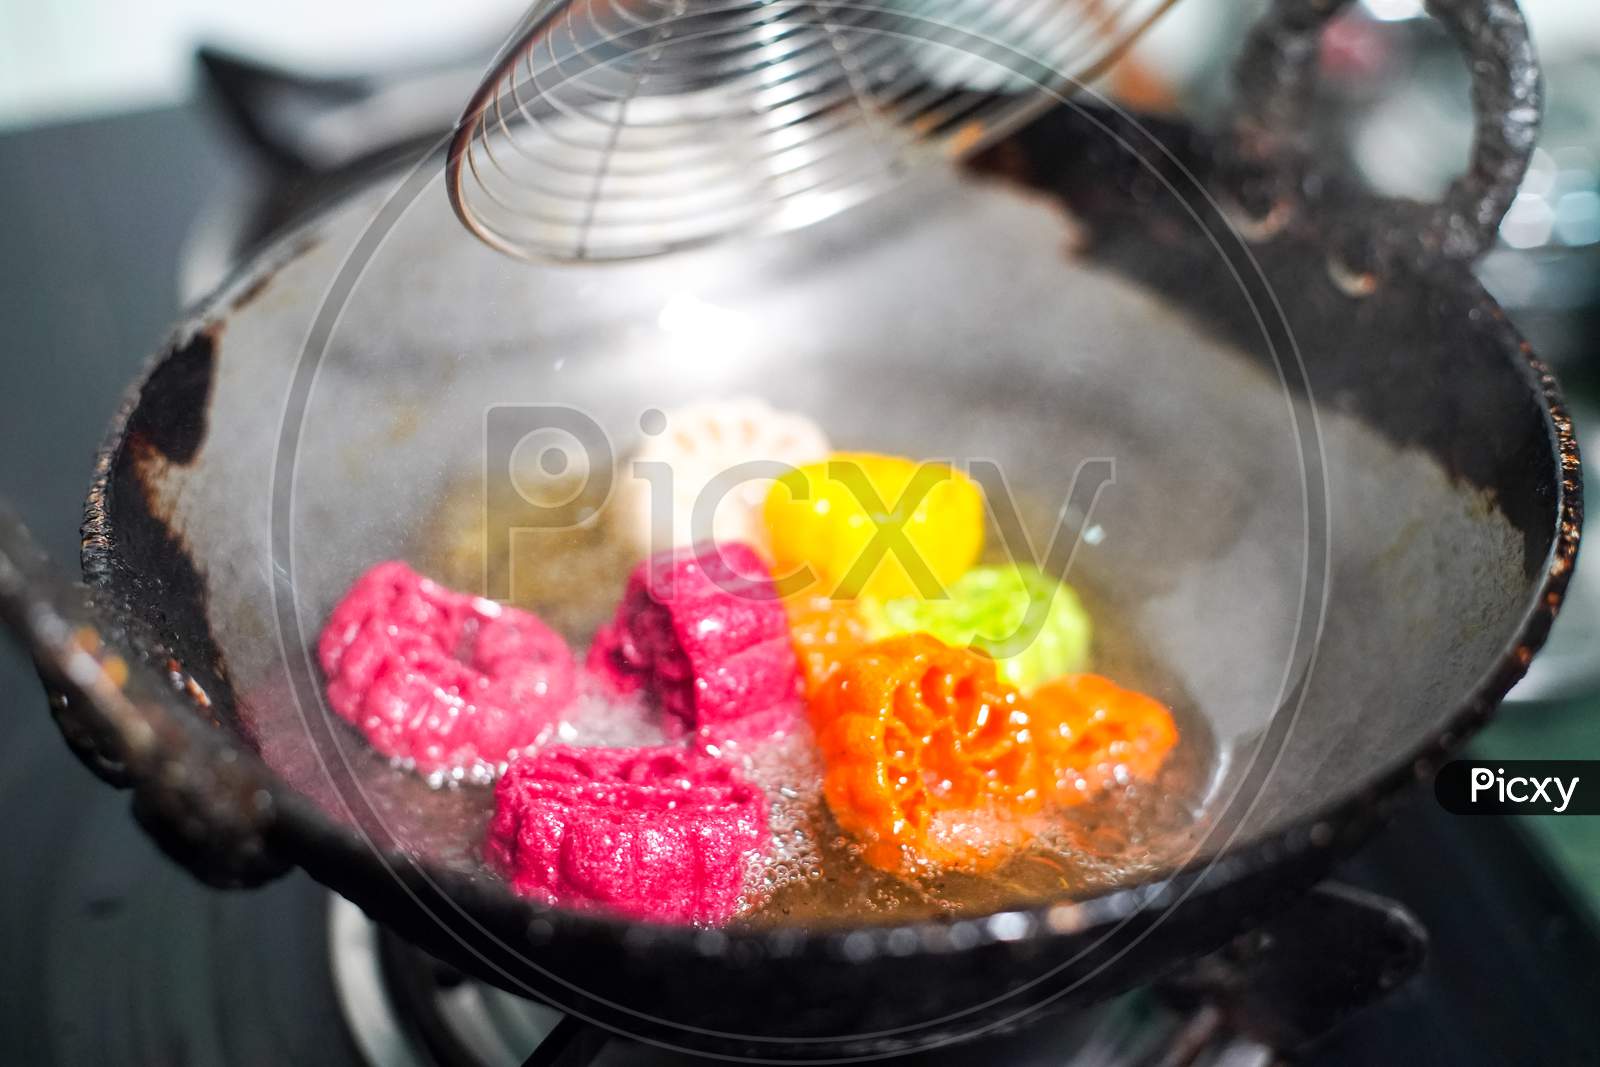 Shot Of Colorful Fryums Being Deep Fried In Hot Oil Bubbling And Sizzling With Bubbles Forming And Size Increasing Of This Popular North Indian Snack And Street Food